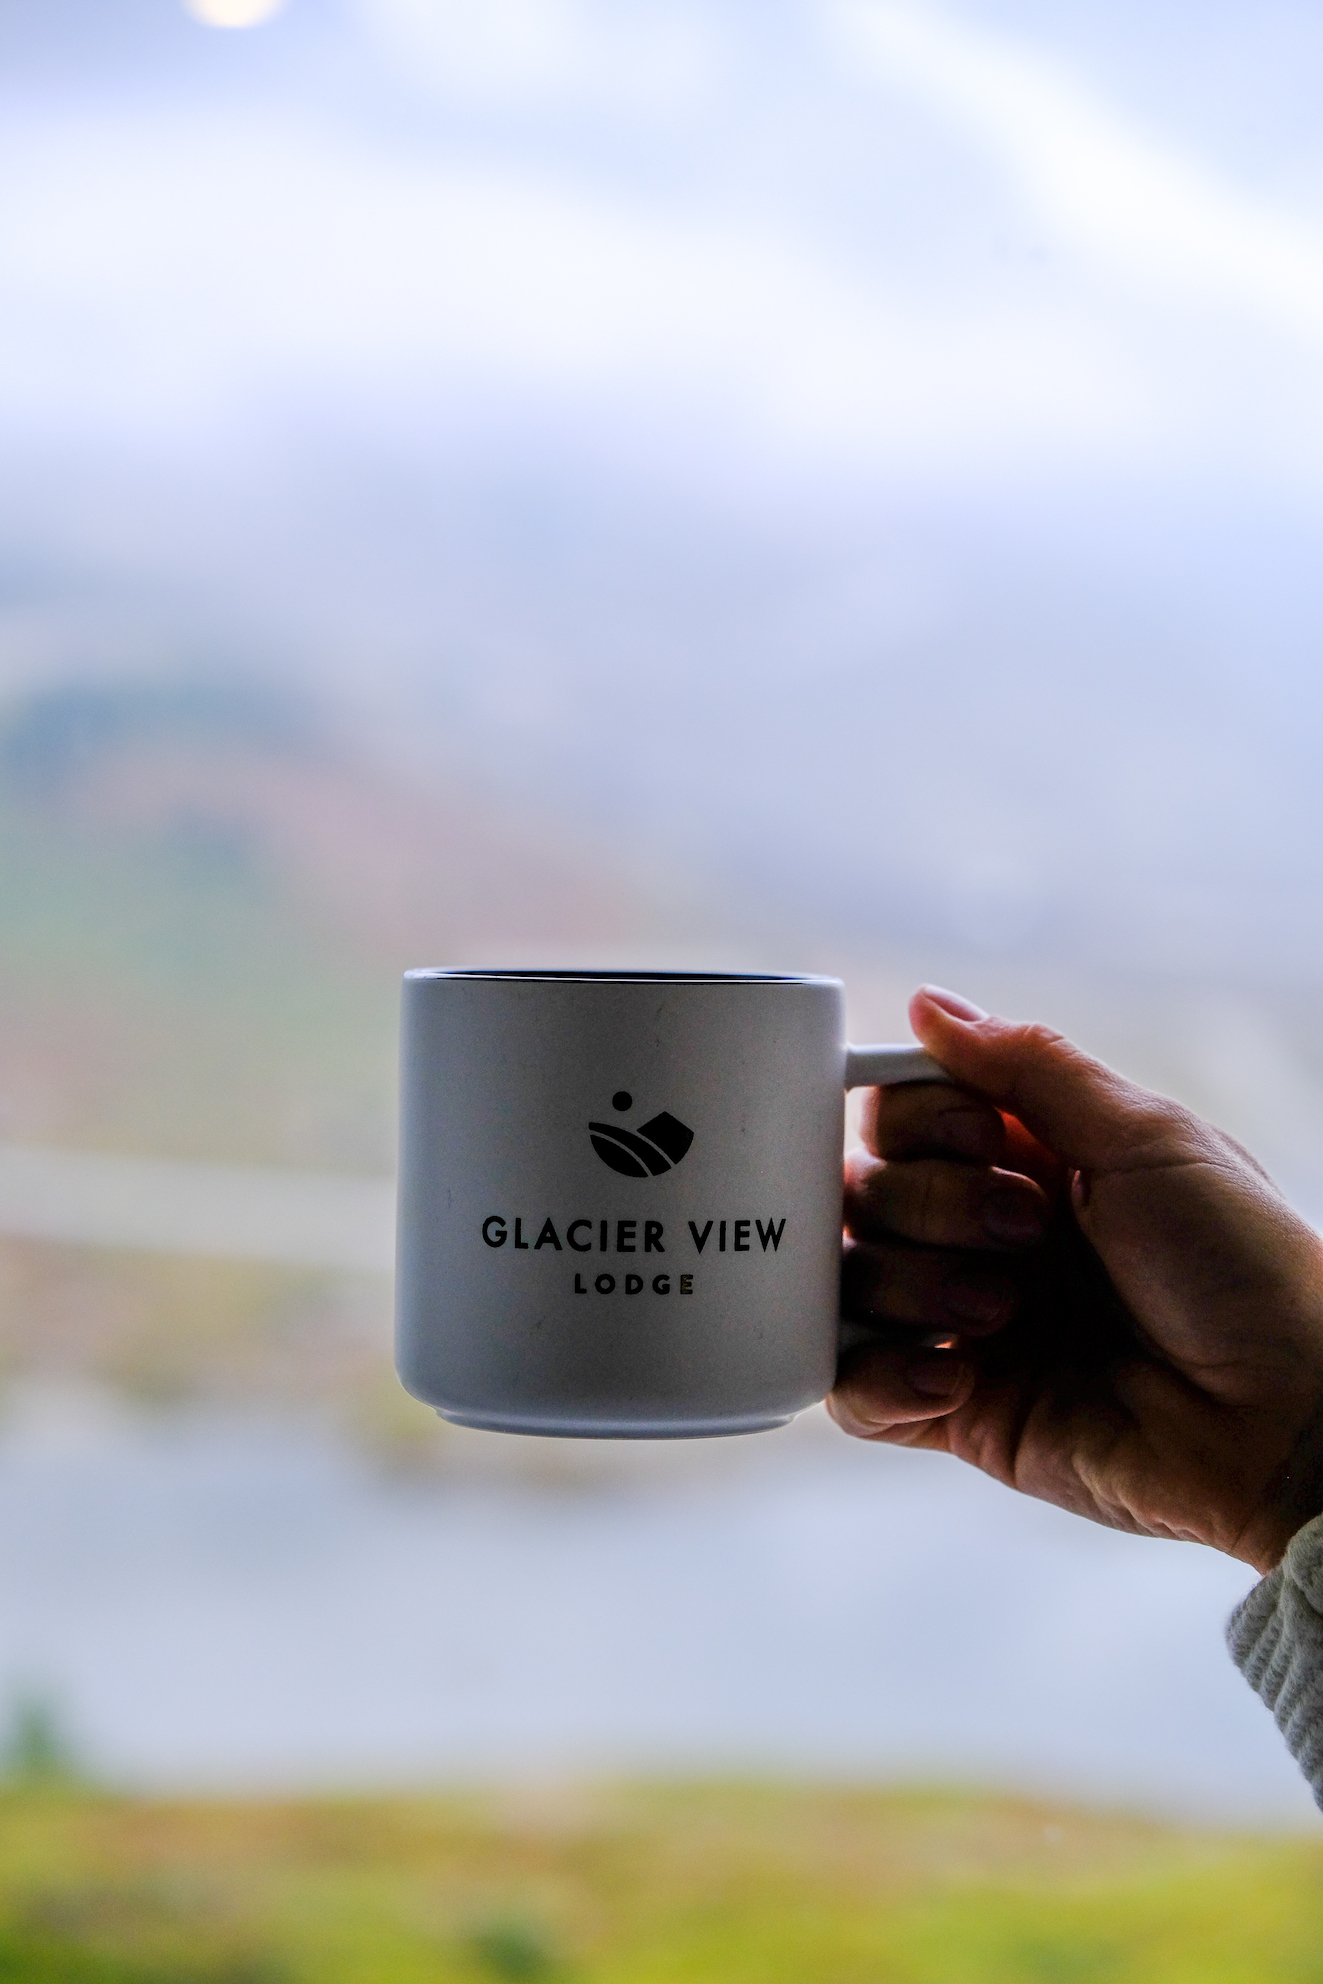 staying at the glacier view lodge